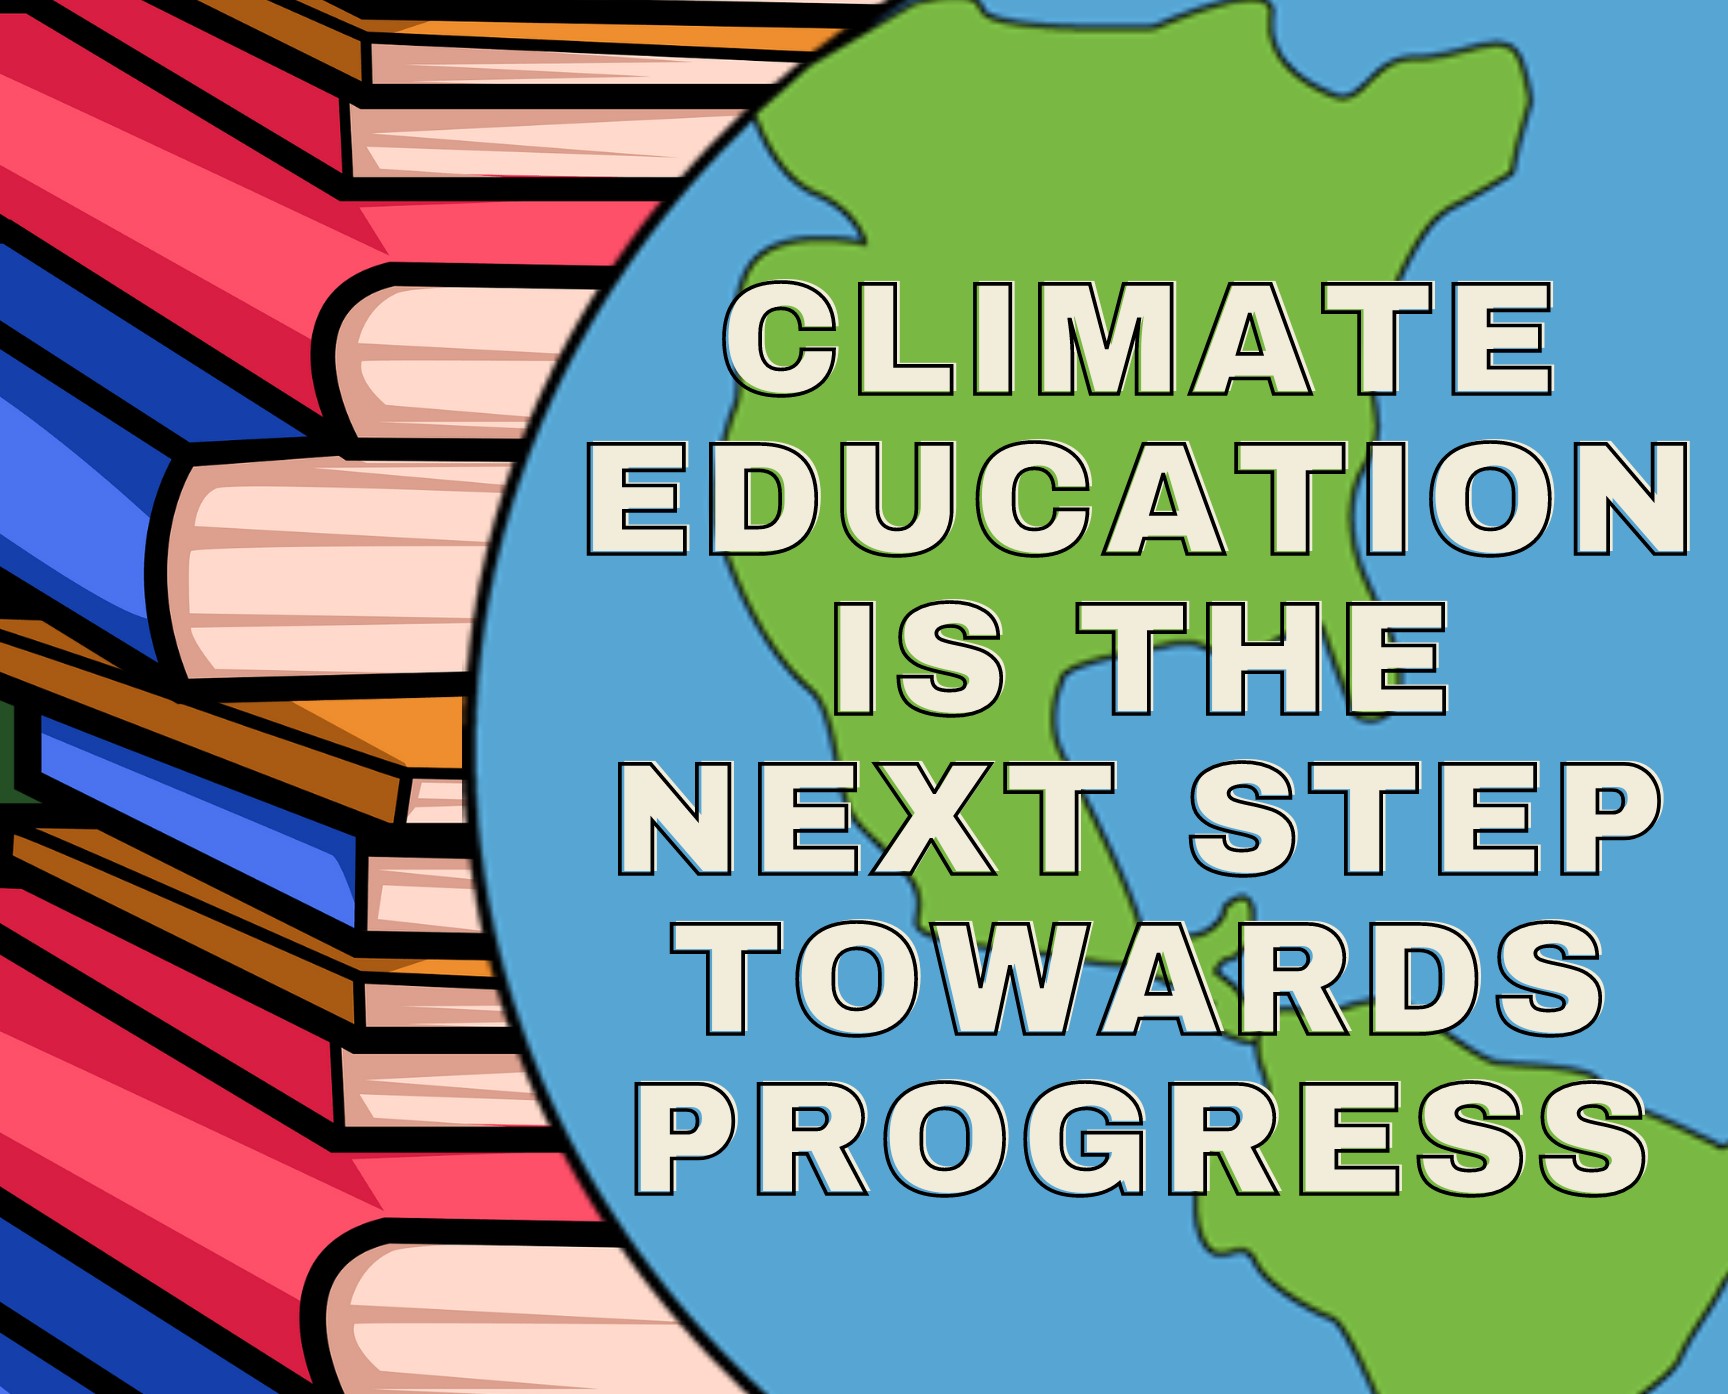 Opinion: Climate education is the next step towards progress